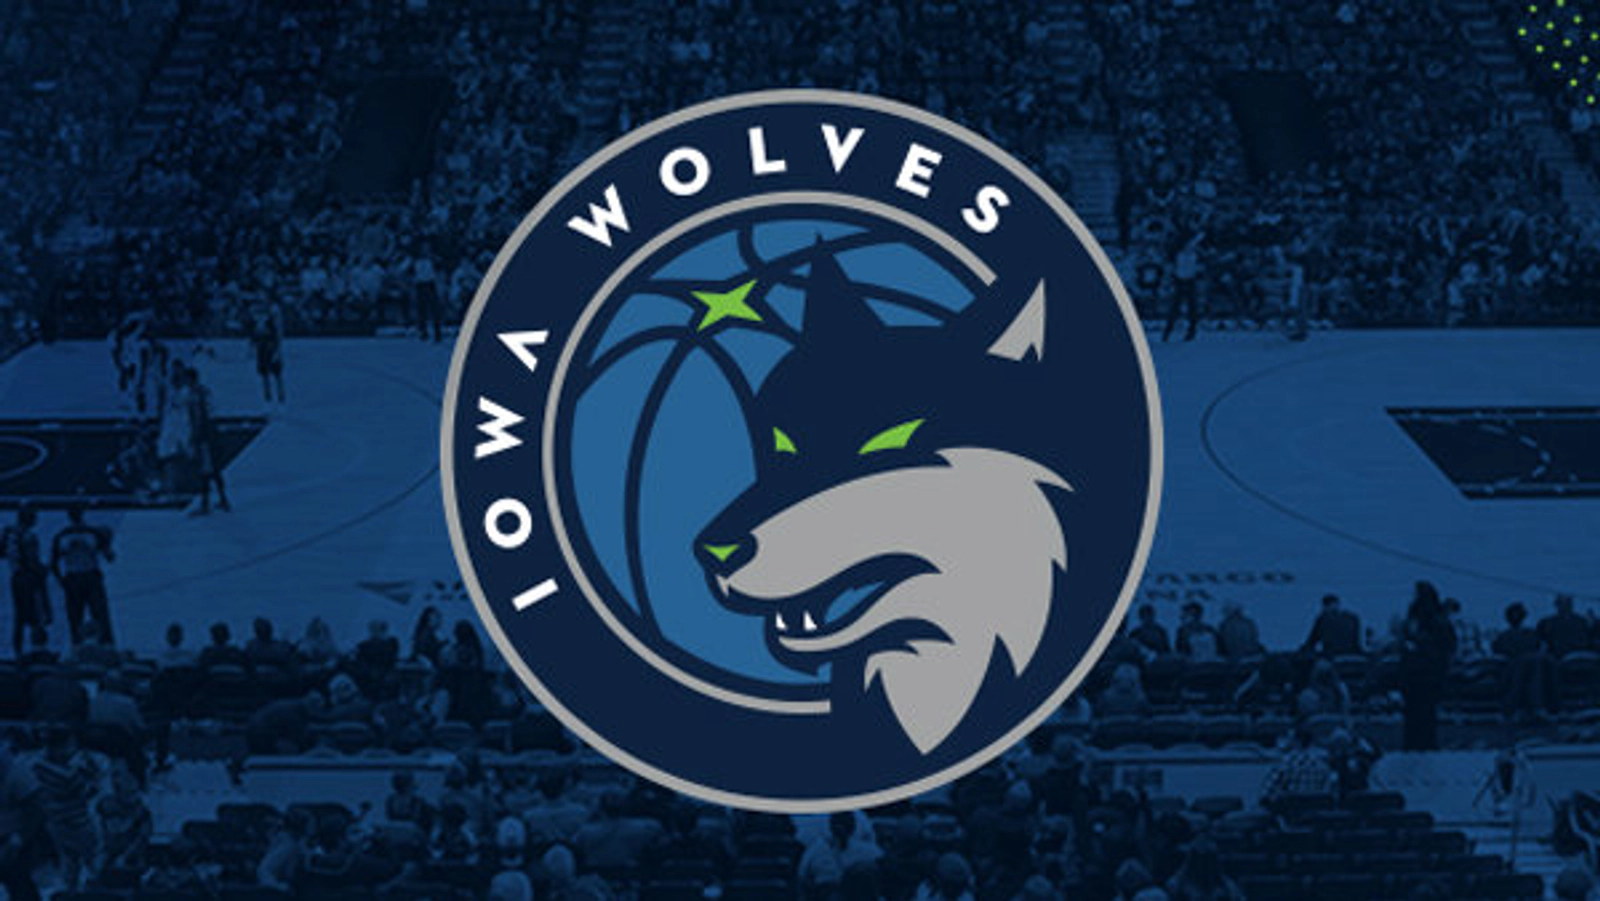    Win Tickets To The Iowa Wolves! - Thumbnail Image